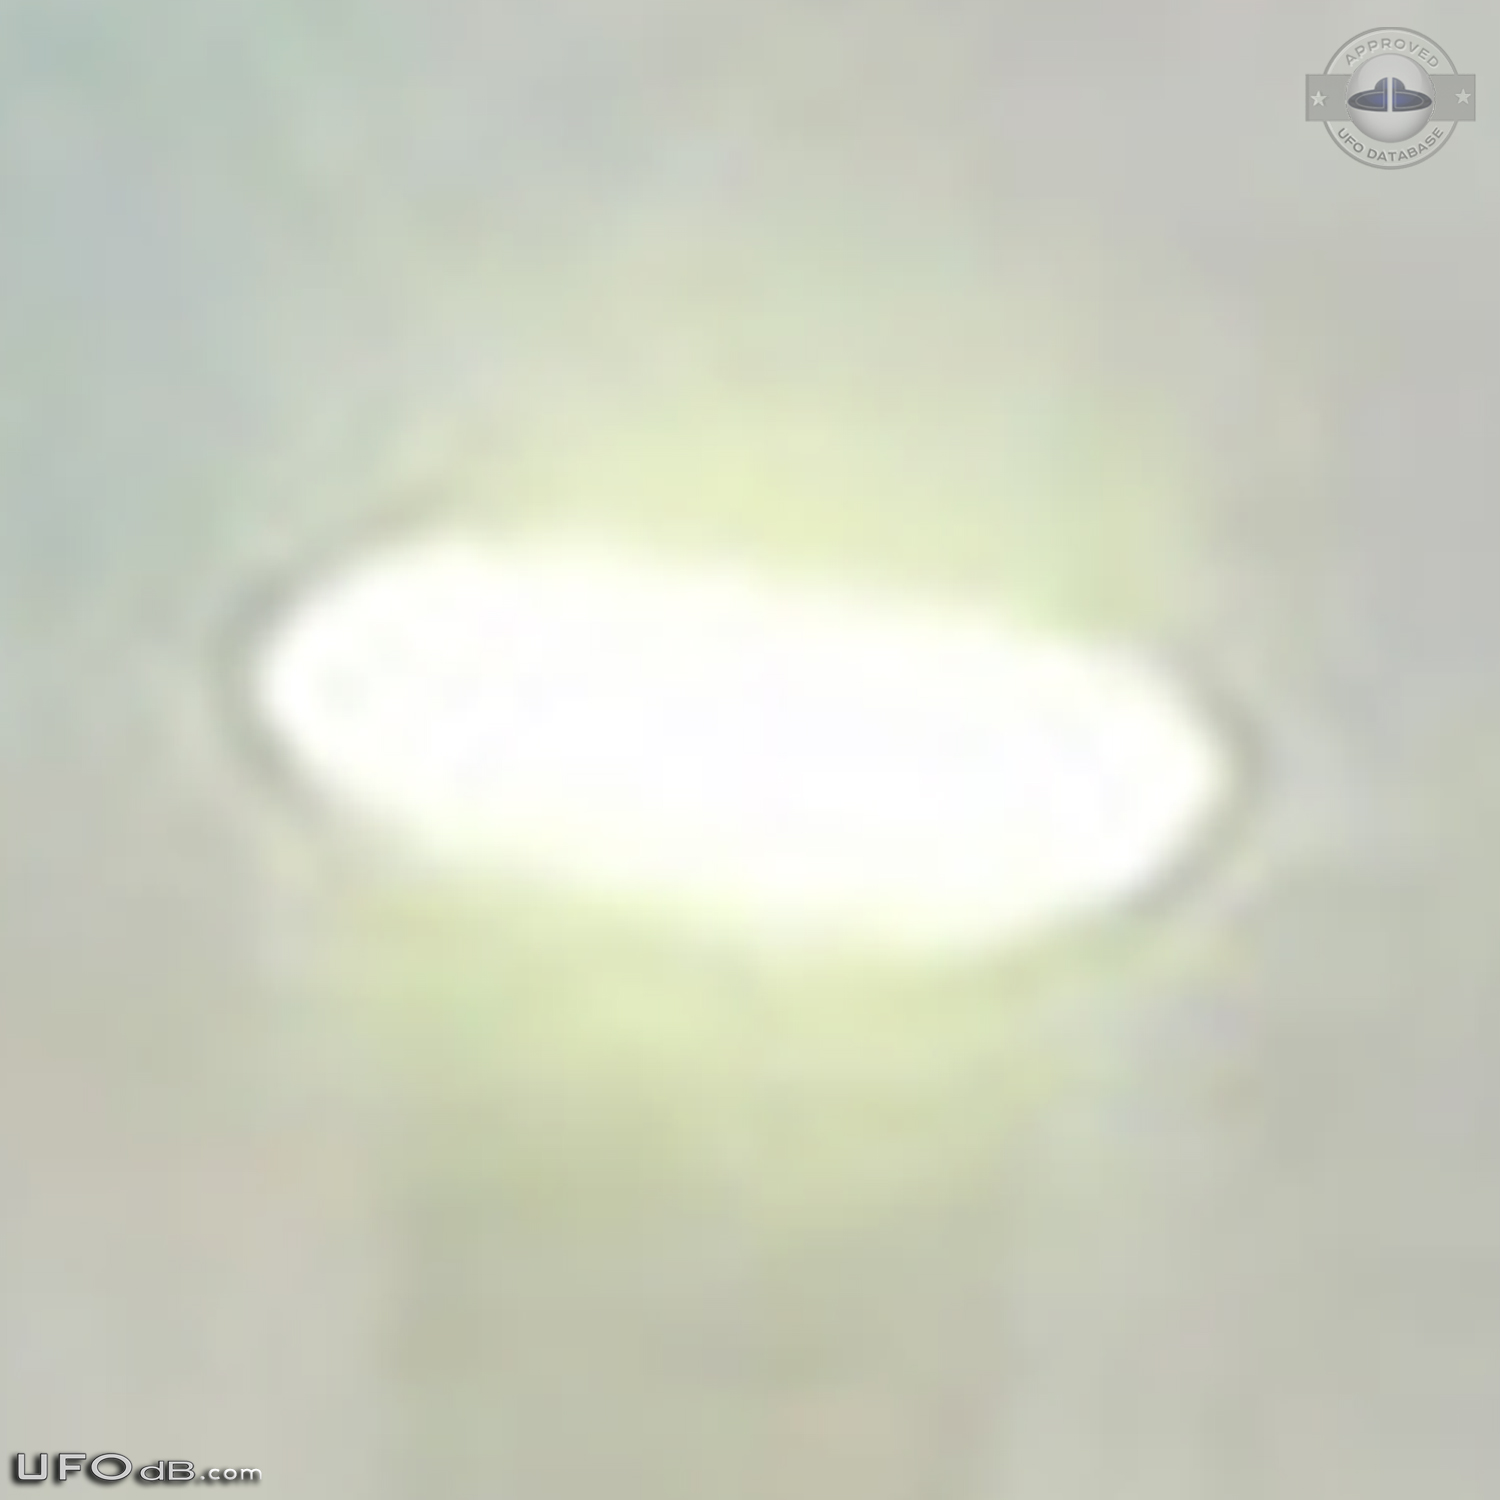 UFO saucer caught from car in Cottonwood California USA 2014 UFO Picture #589-6